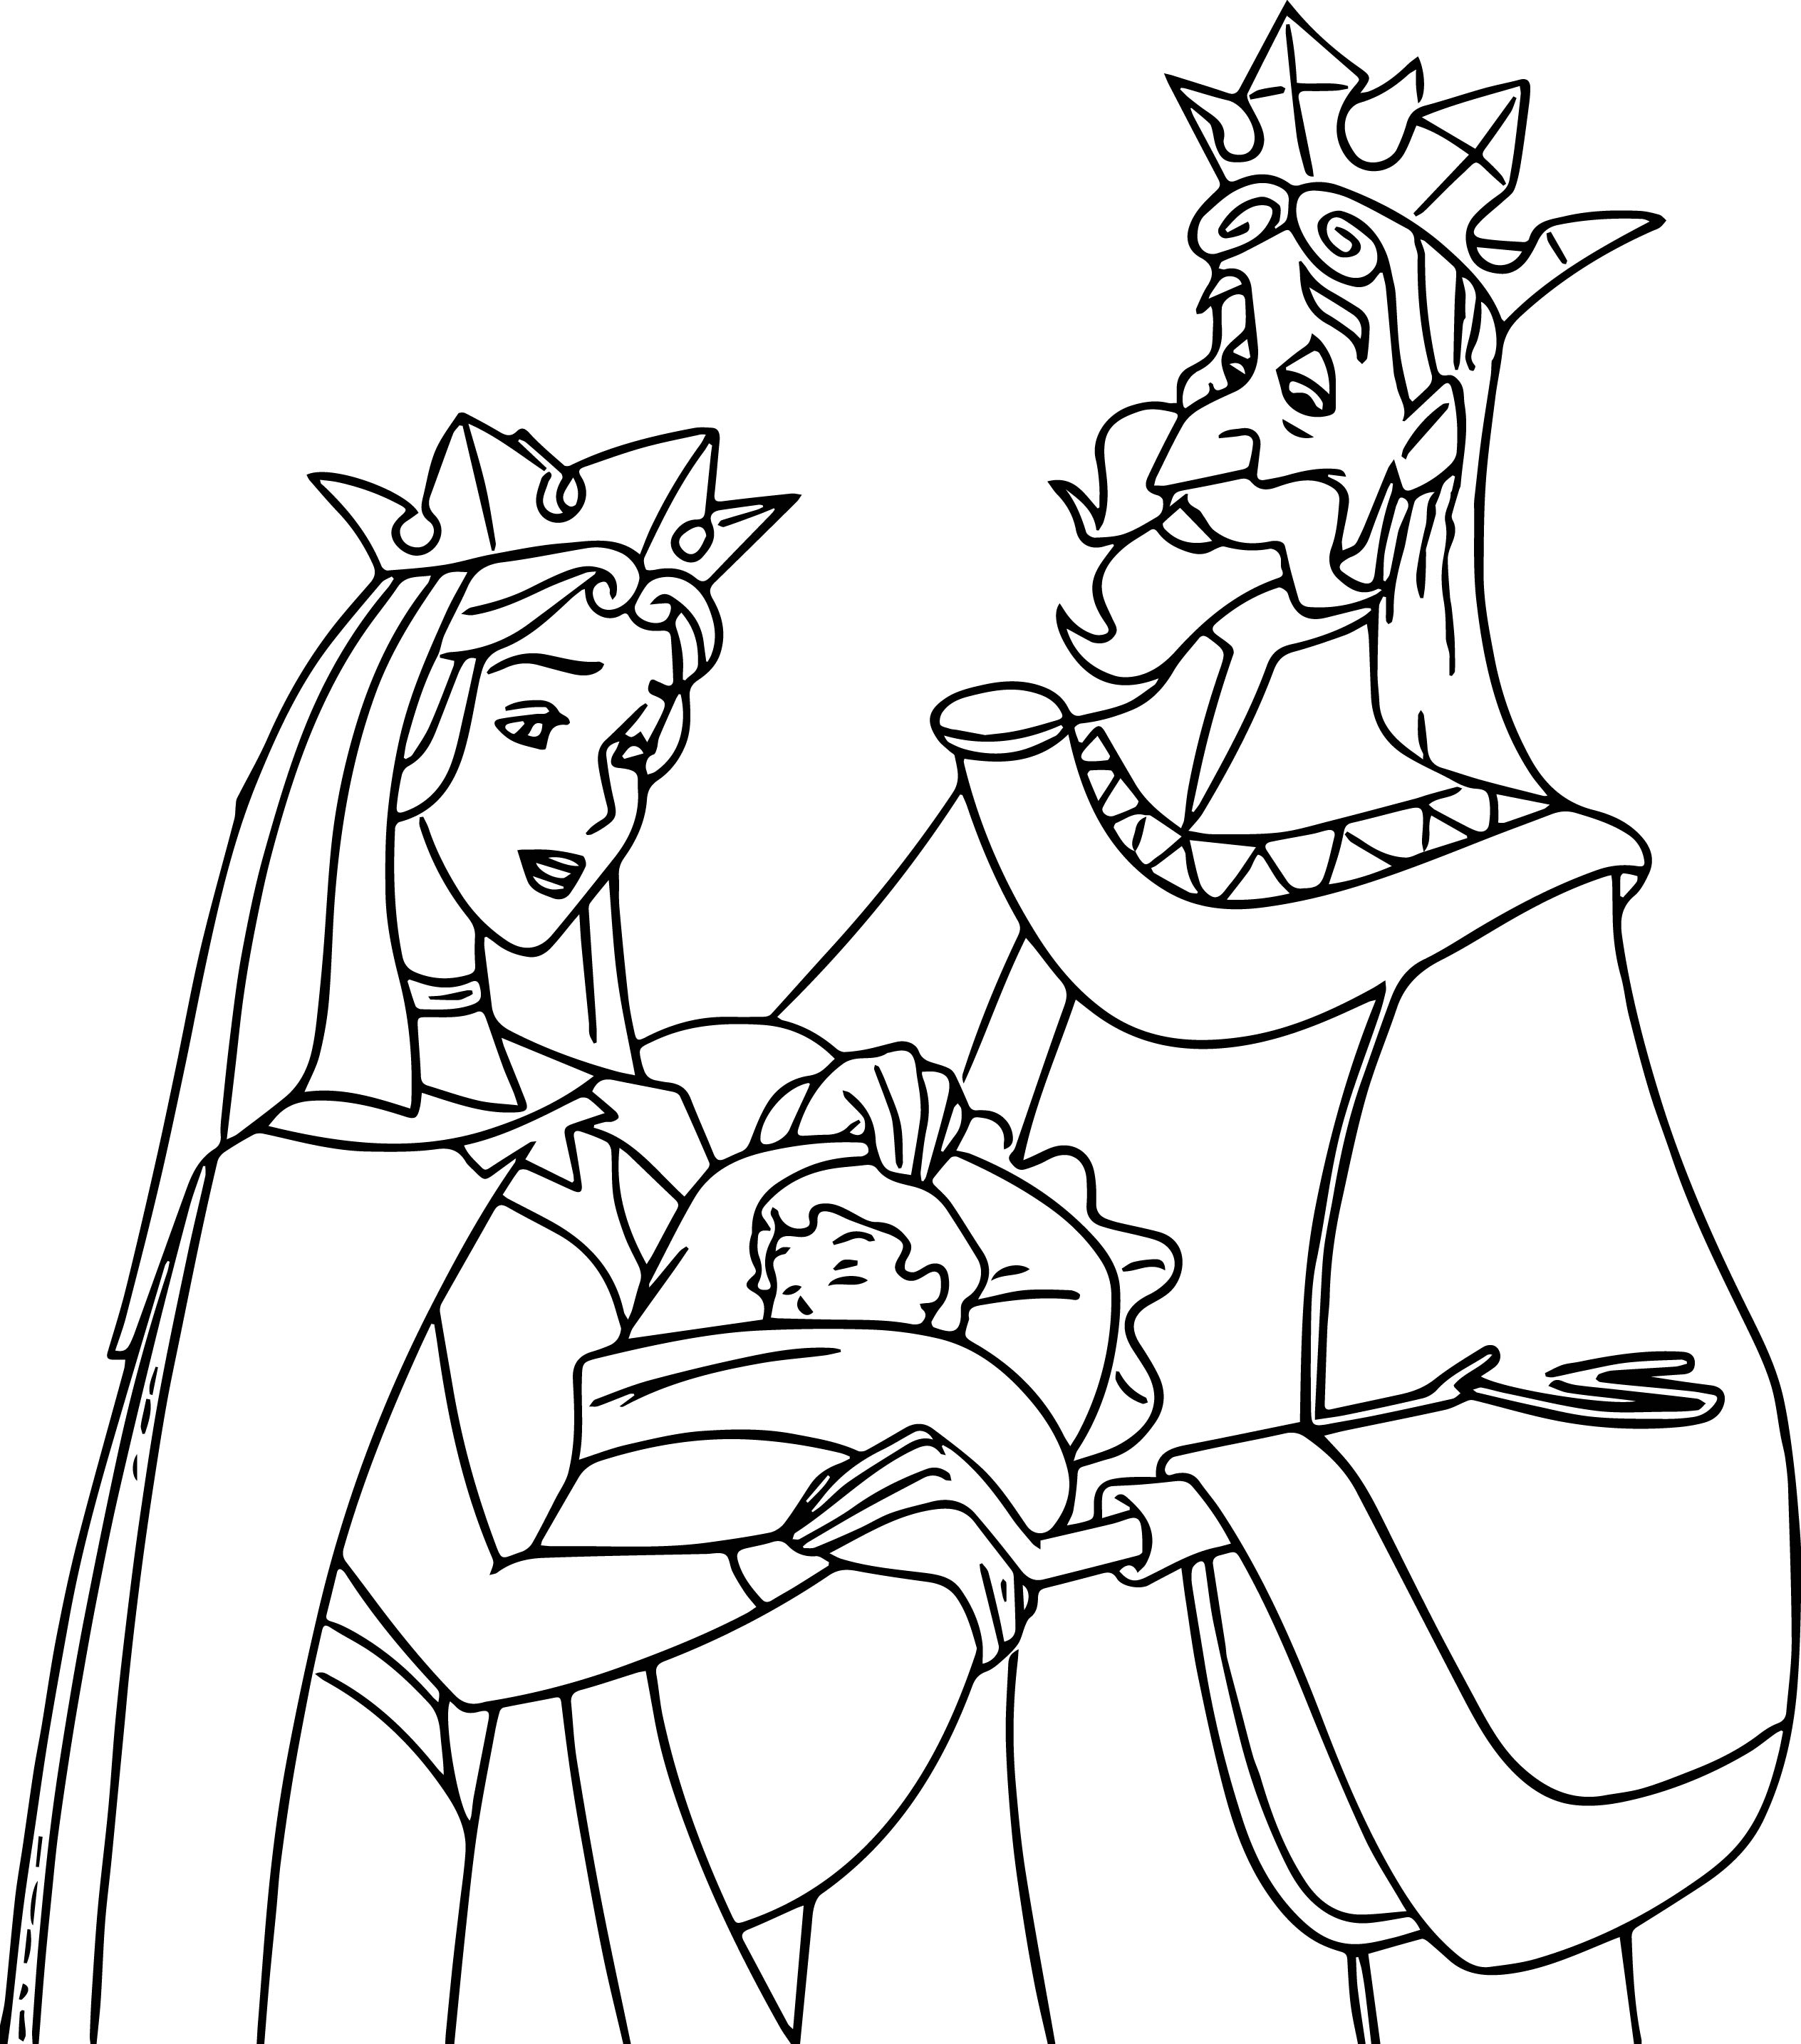 Stroller Coloring Pages at GetColorings.com | Free printable colorings